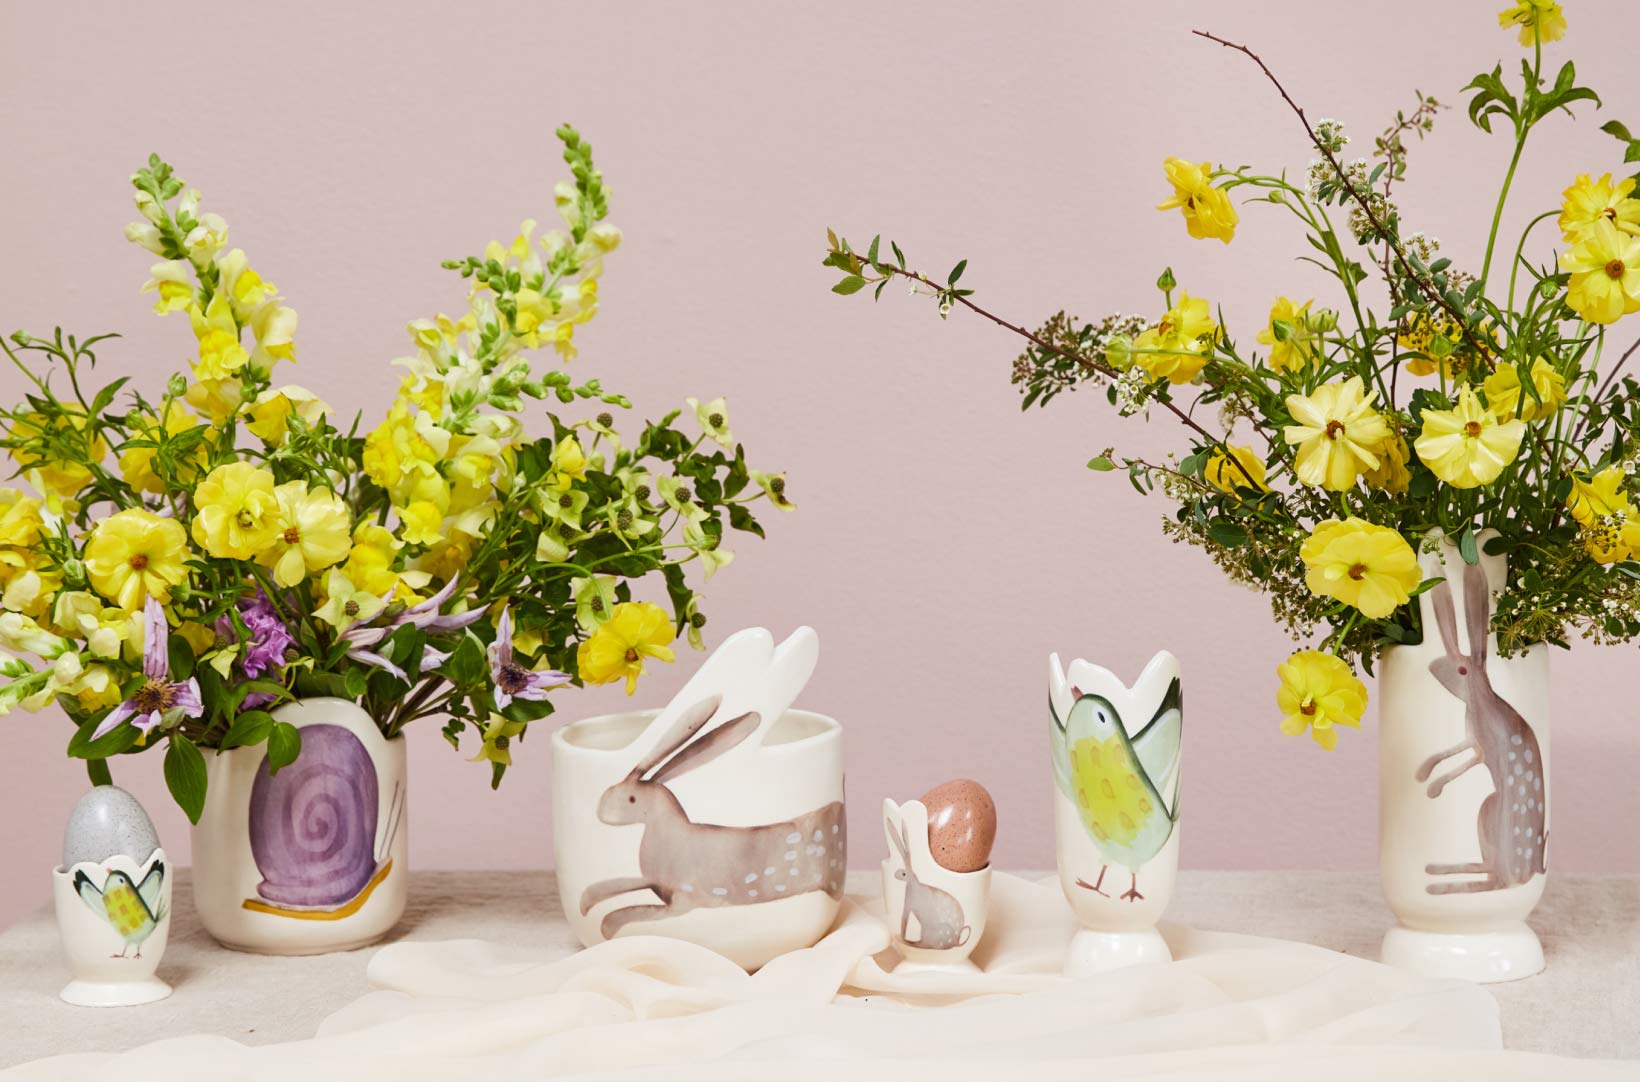 Hero image featuring spring critter vases and vessels